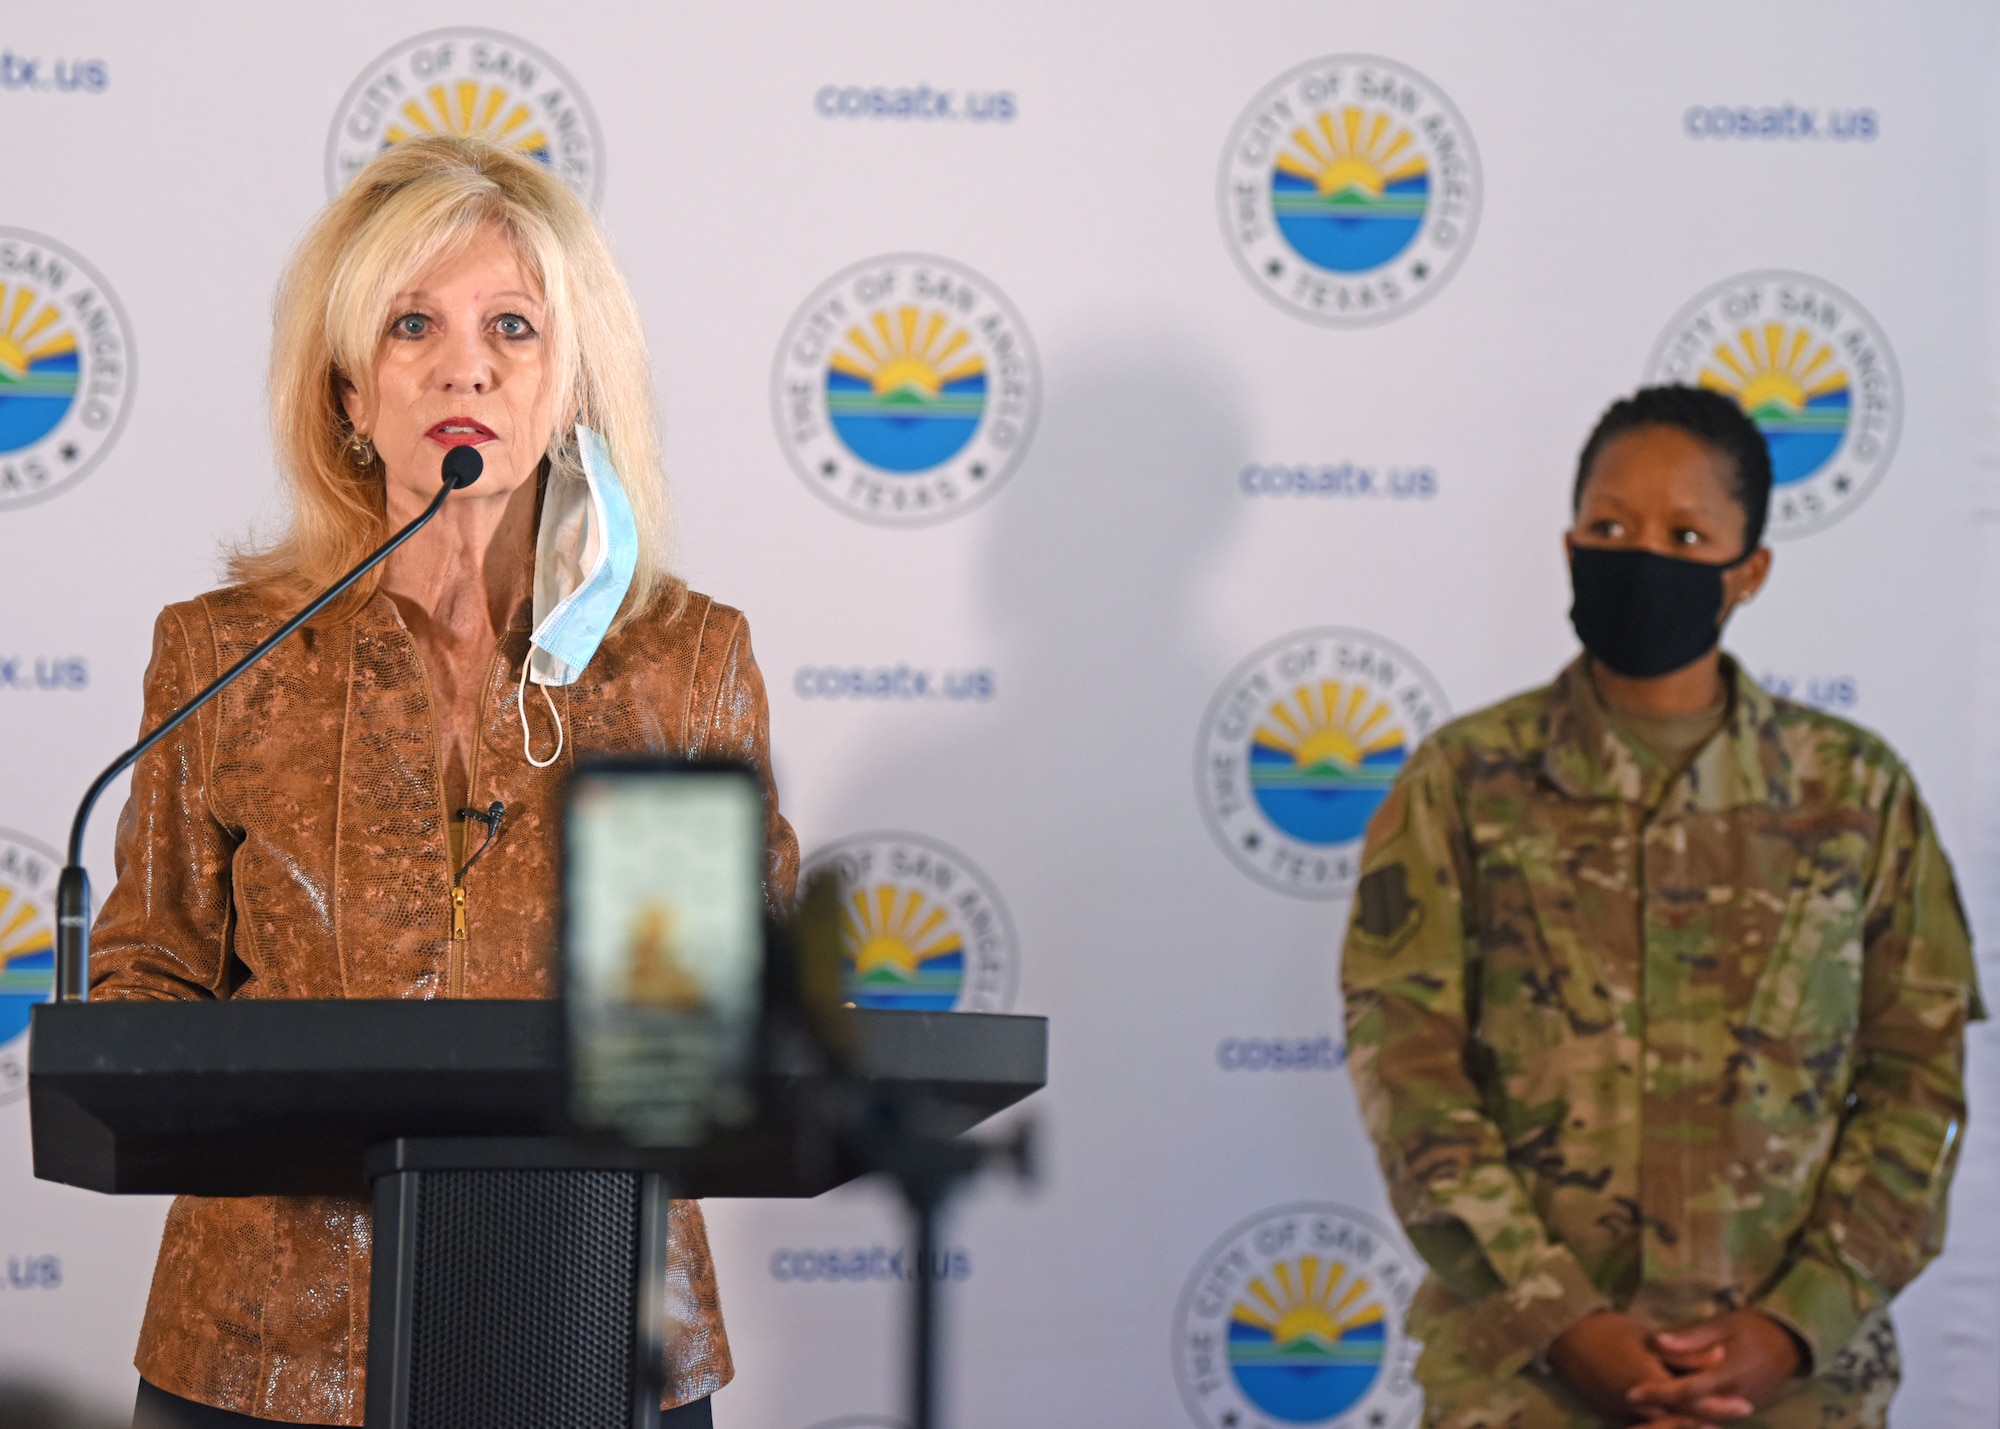 San Angelo Mayor, Brenda Gunter, gave a COVID-19 status update during a press conference at City Hall in San Angelo, Texas, Oct. 30, 2020. Goodfellow Air Force Base and other local leaders showed support and unity of effort as the mayor reminded the community to remain vigilant, practice social distancing, wear face masks and to follow Centers for Disease Control and Prevention guidance. (U.S. Air Force photo by Airman 1st Class Ethan Sherwood)